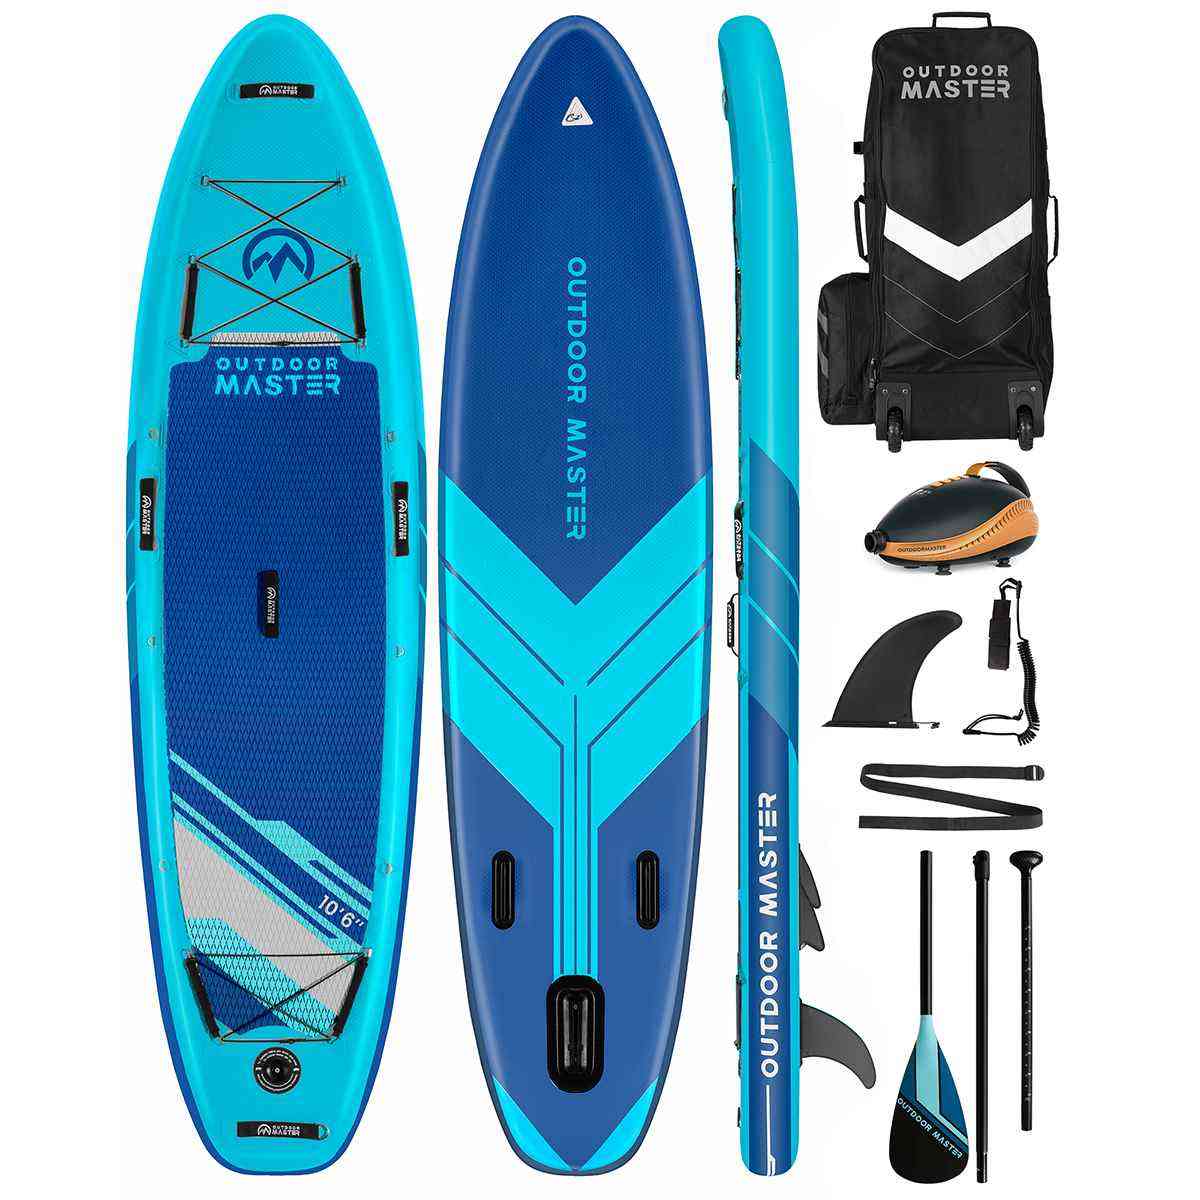 Outdoor Master 10.6 Inflatable Paddle Boards Swordfish Surfboard for Water Sport, Turquoise / + Dolphin E-Pump